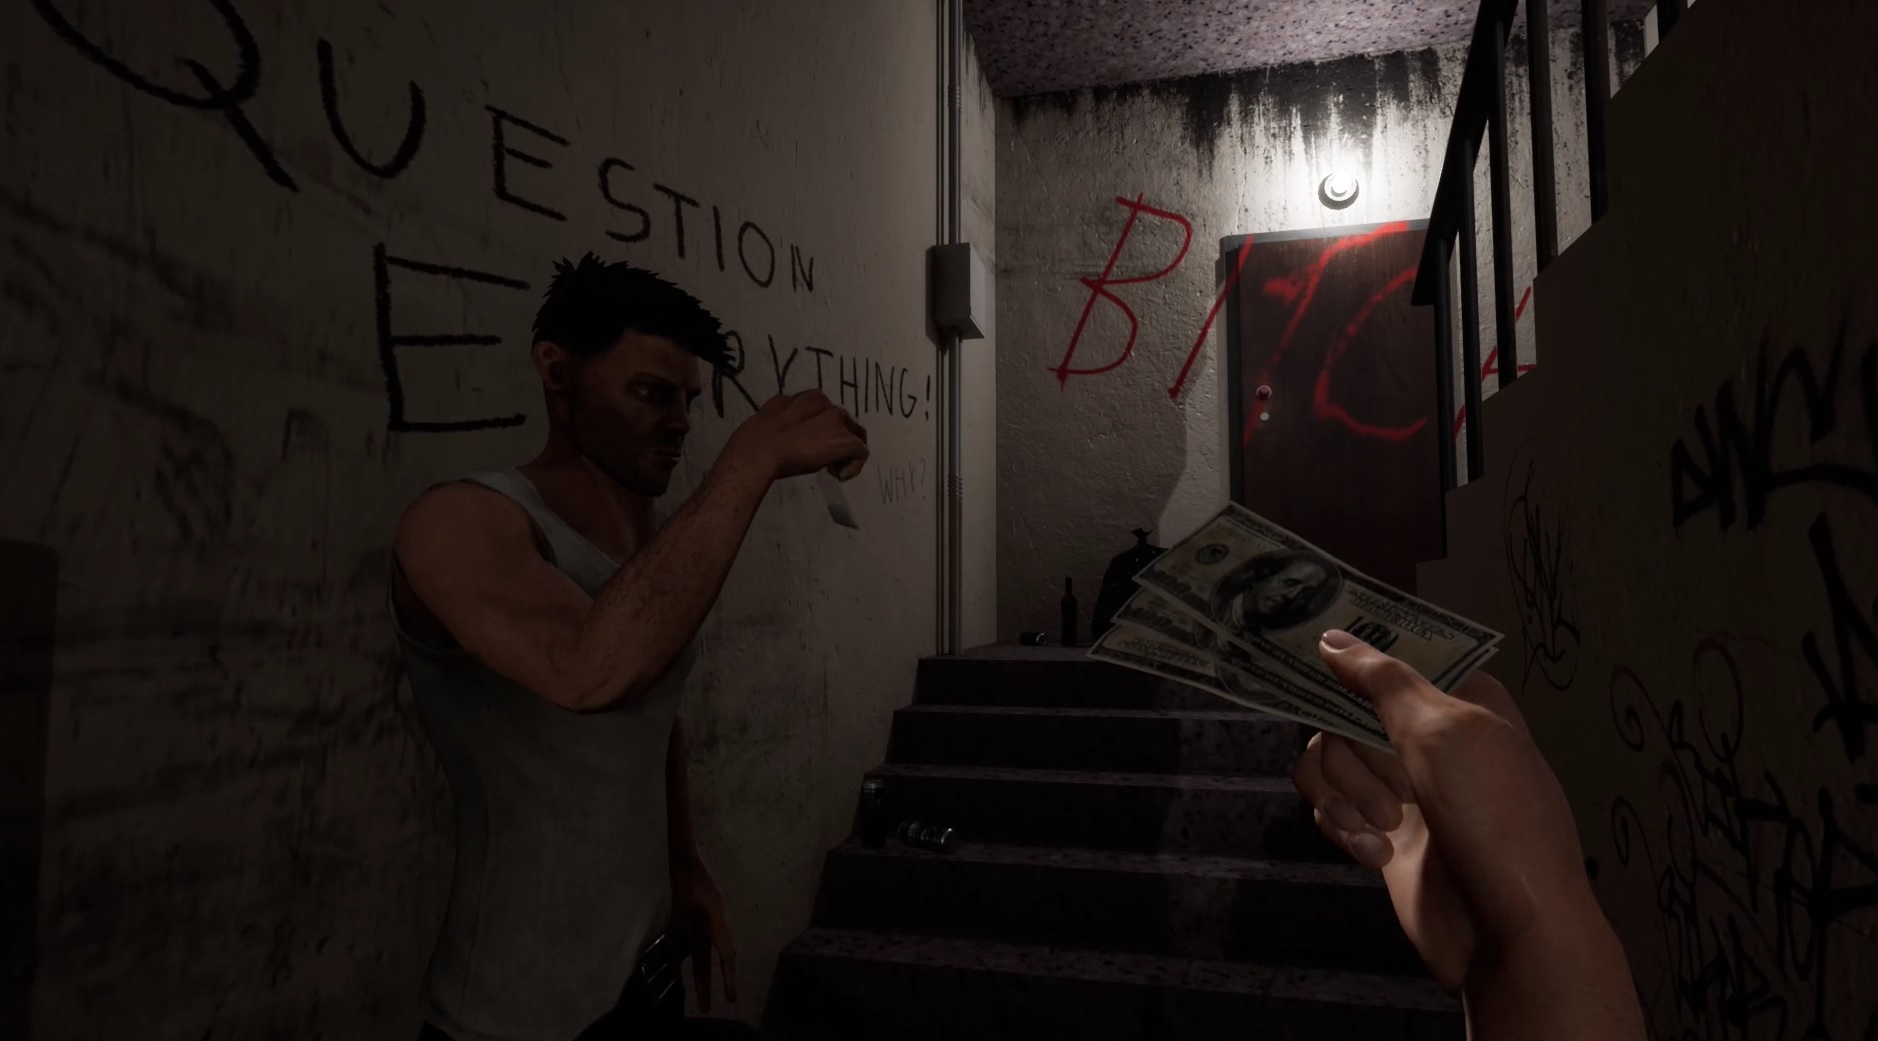 Poles are making a video game about being a drug dealer